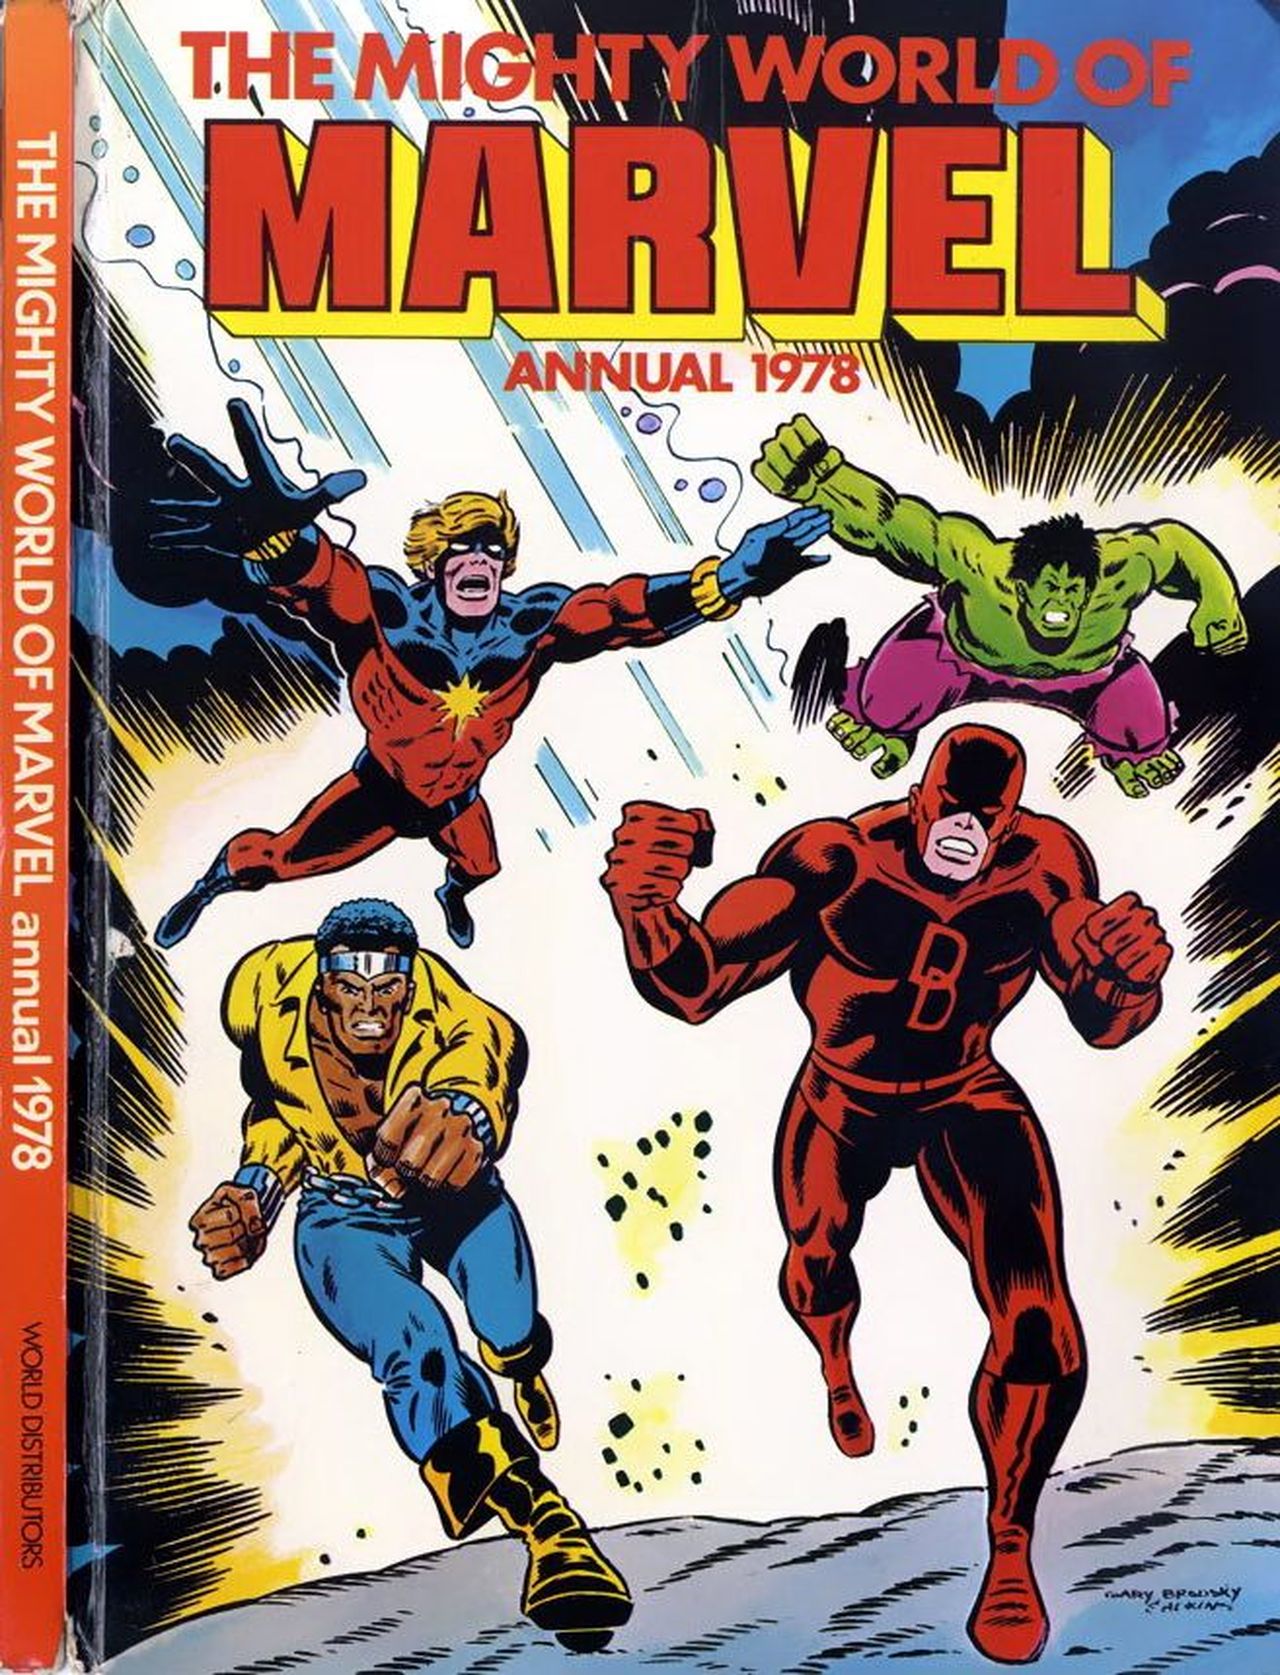 Read online Marvel Annual comic -  Issue #1978 - 1